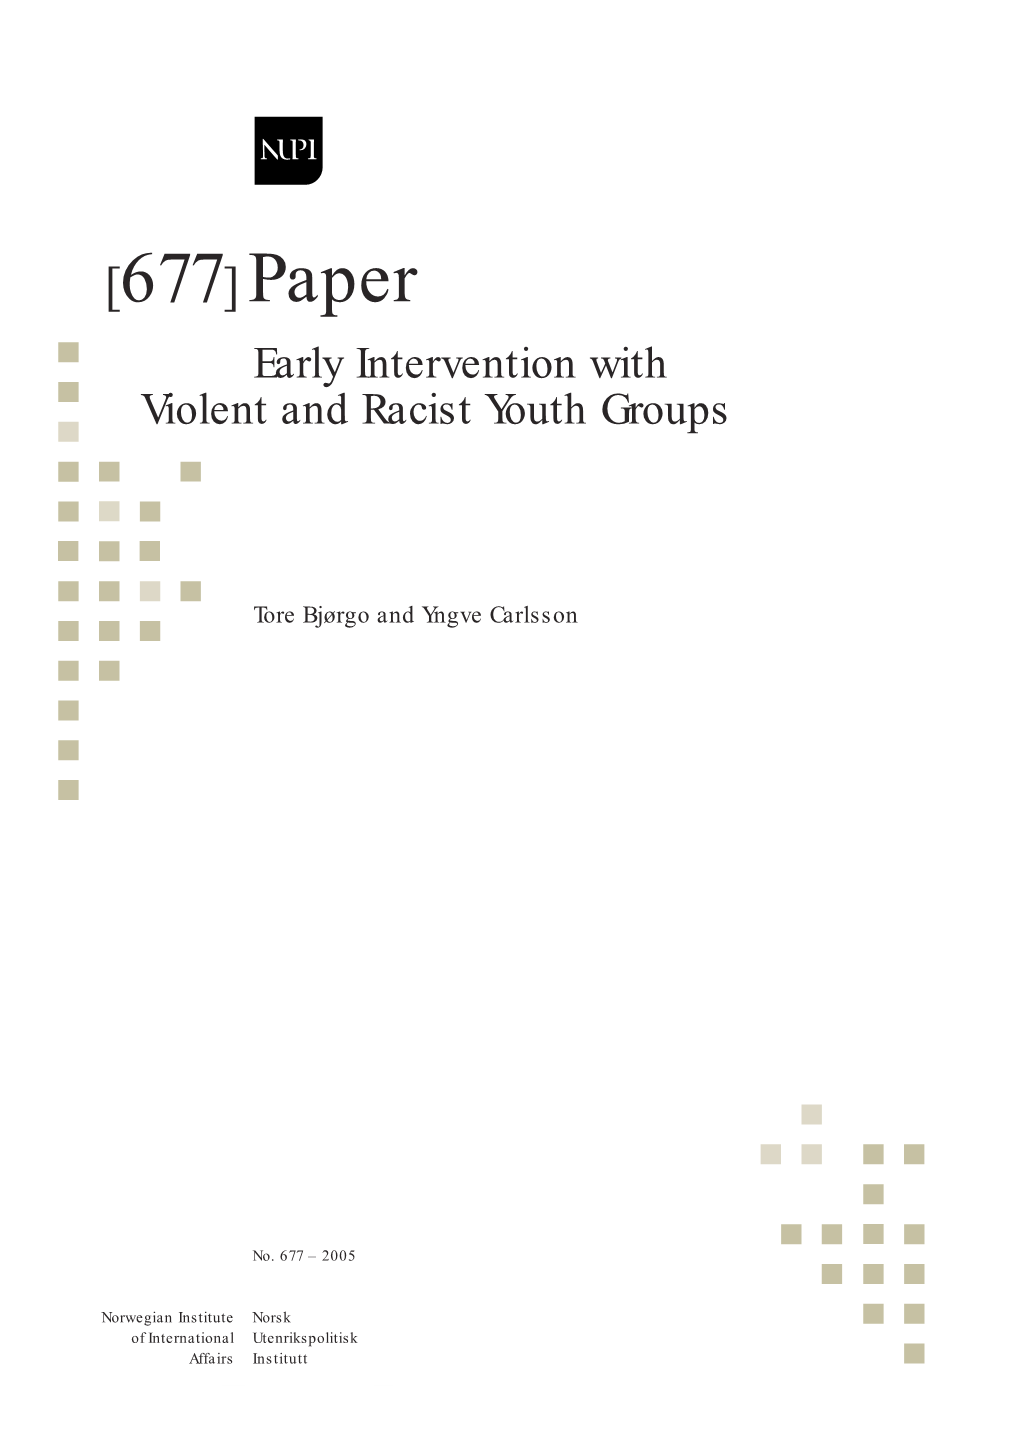 Early Intervention with Violent and Racist Youth Groups